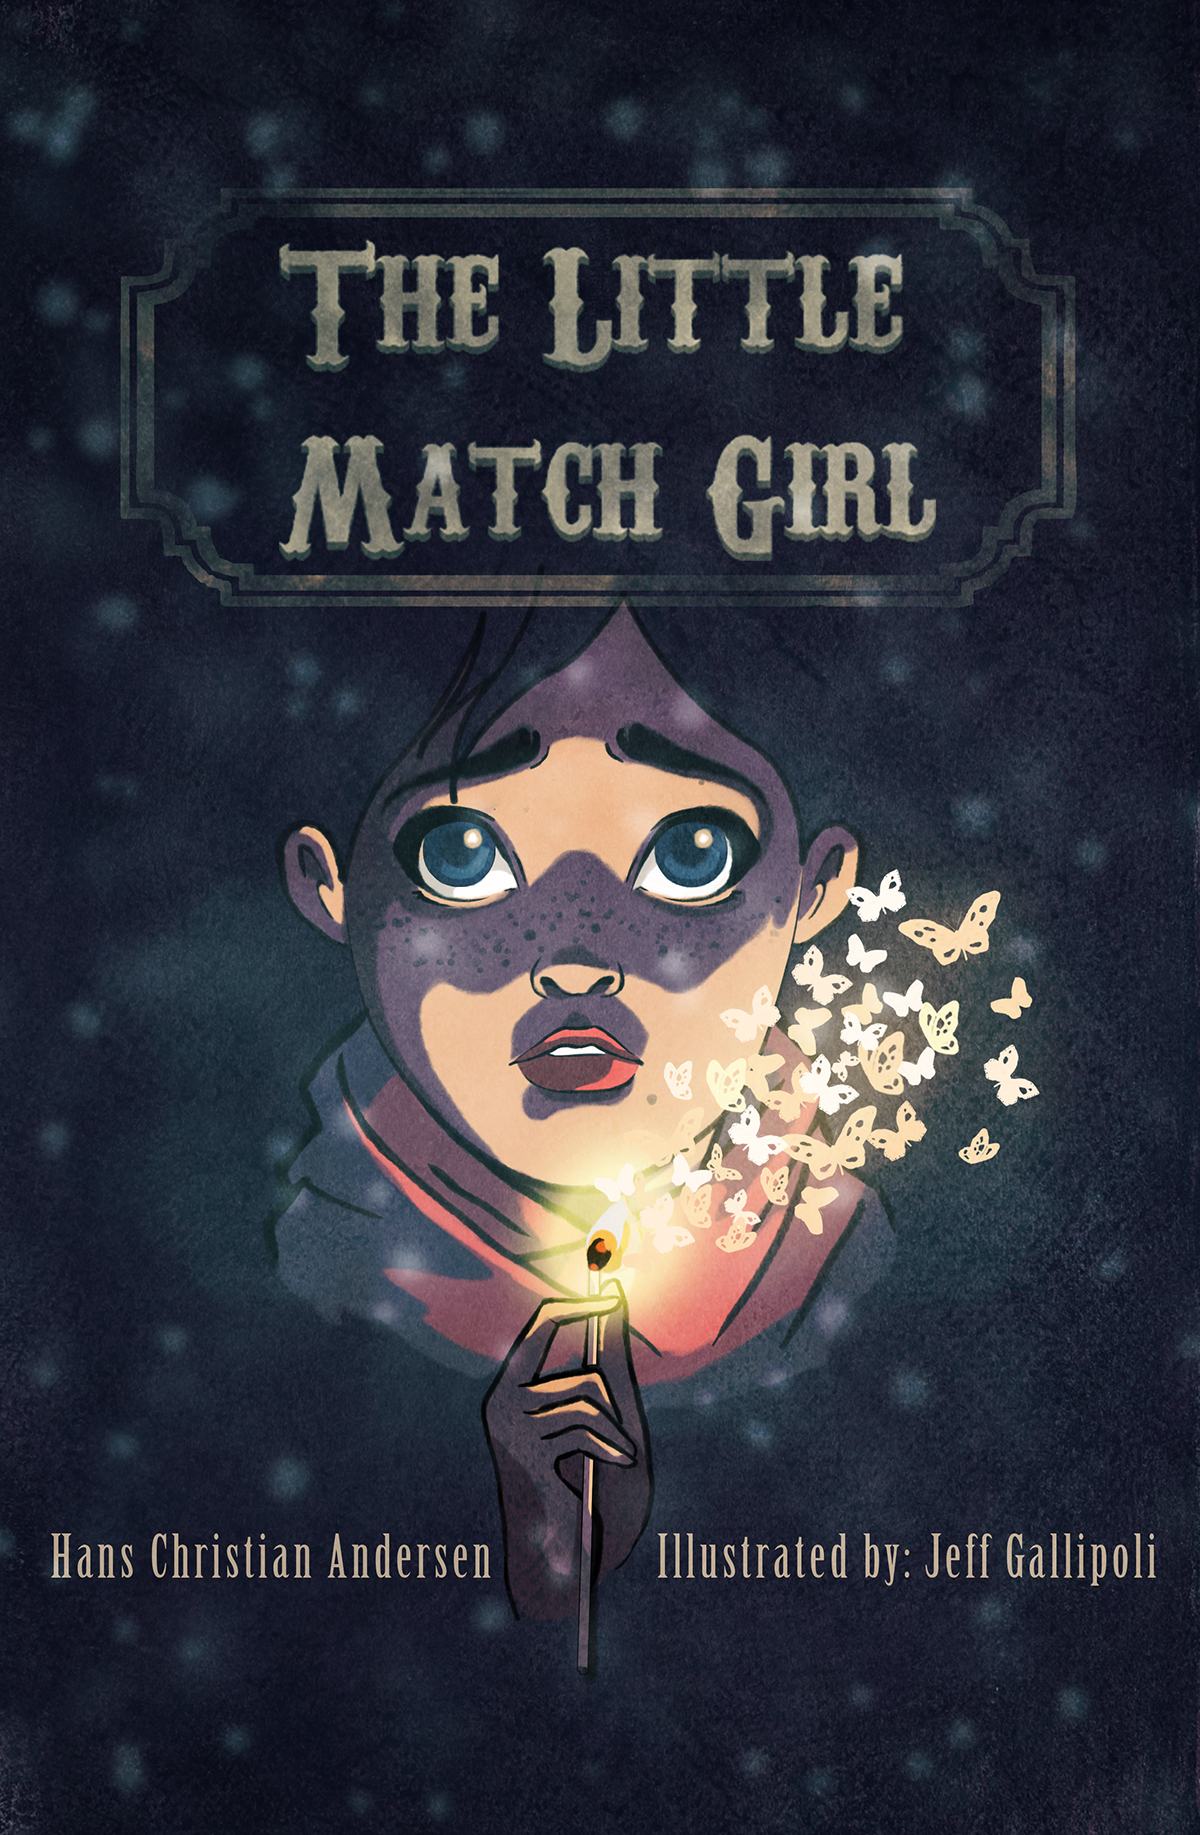 TheLittleMatchgirl girl fairy tale photoshop little girl match book book cover cover short story